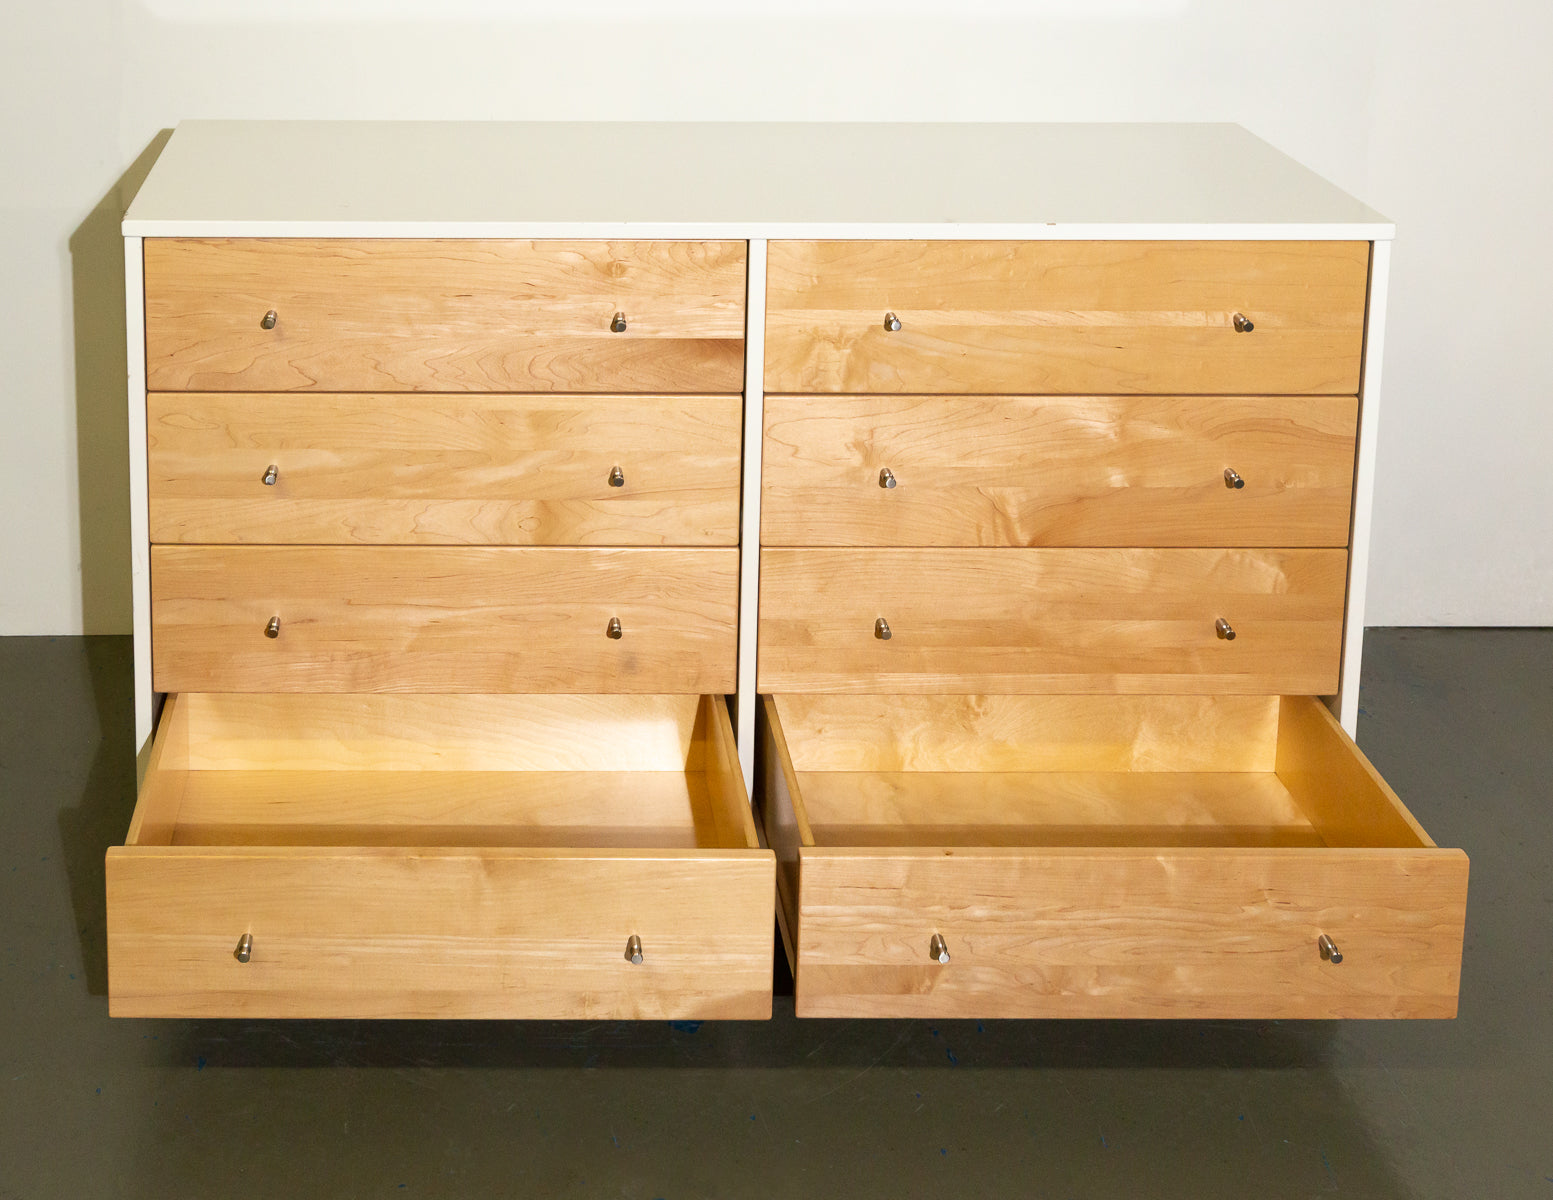 Room & Board Chest of Drawers